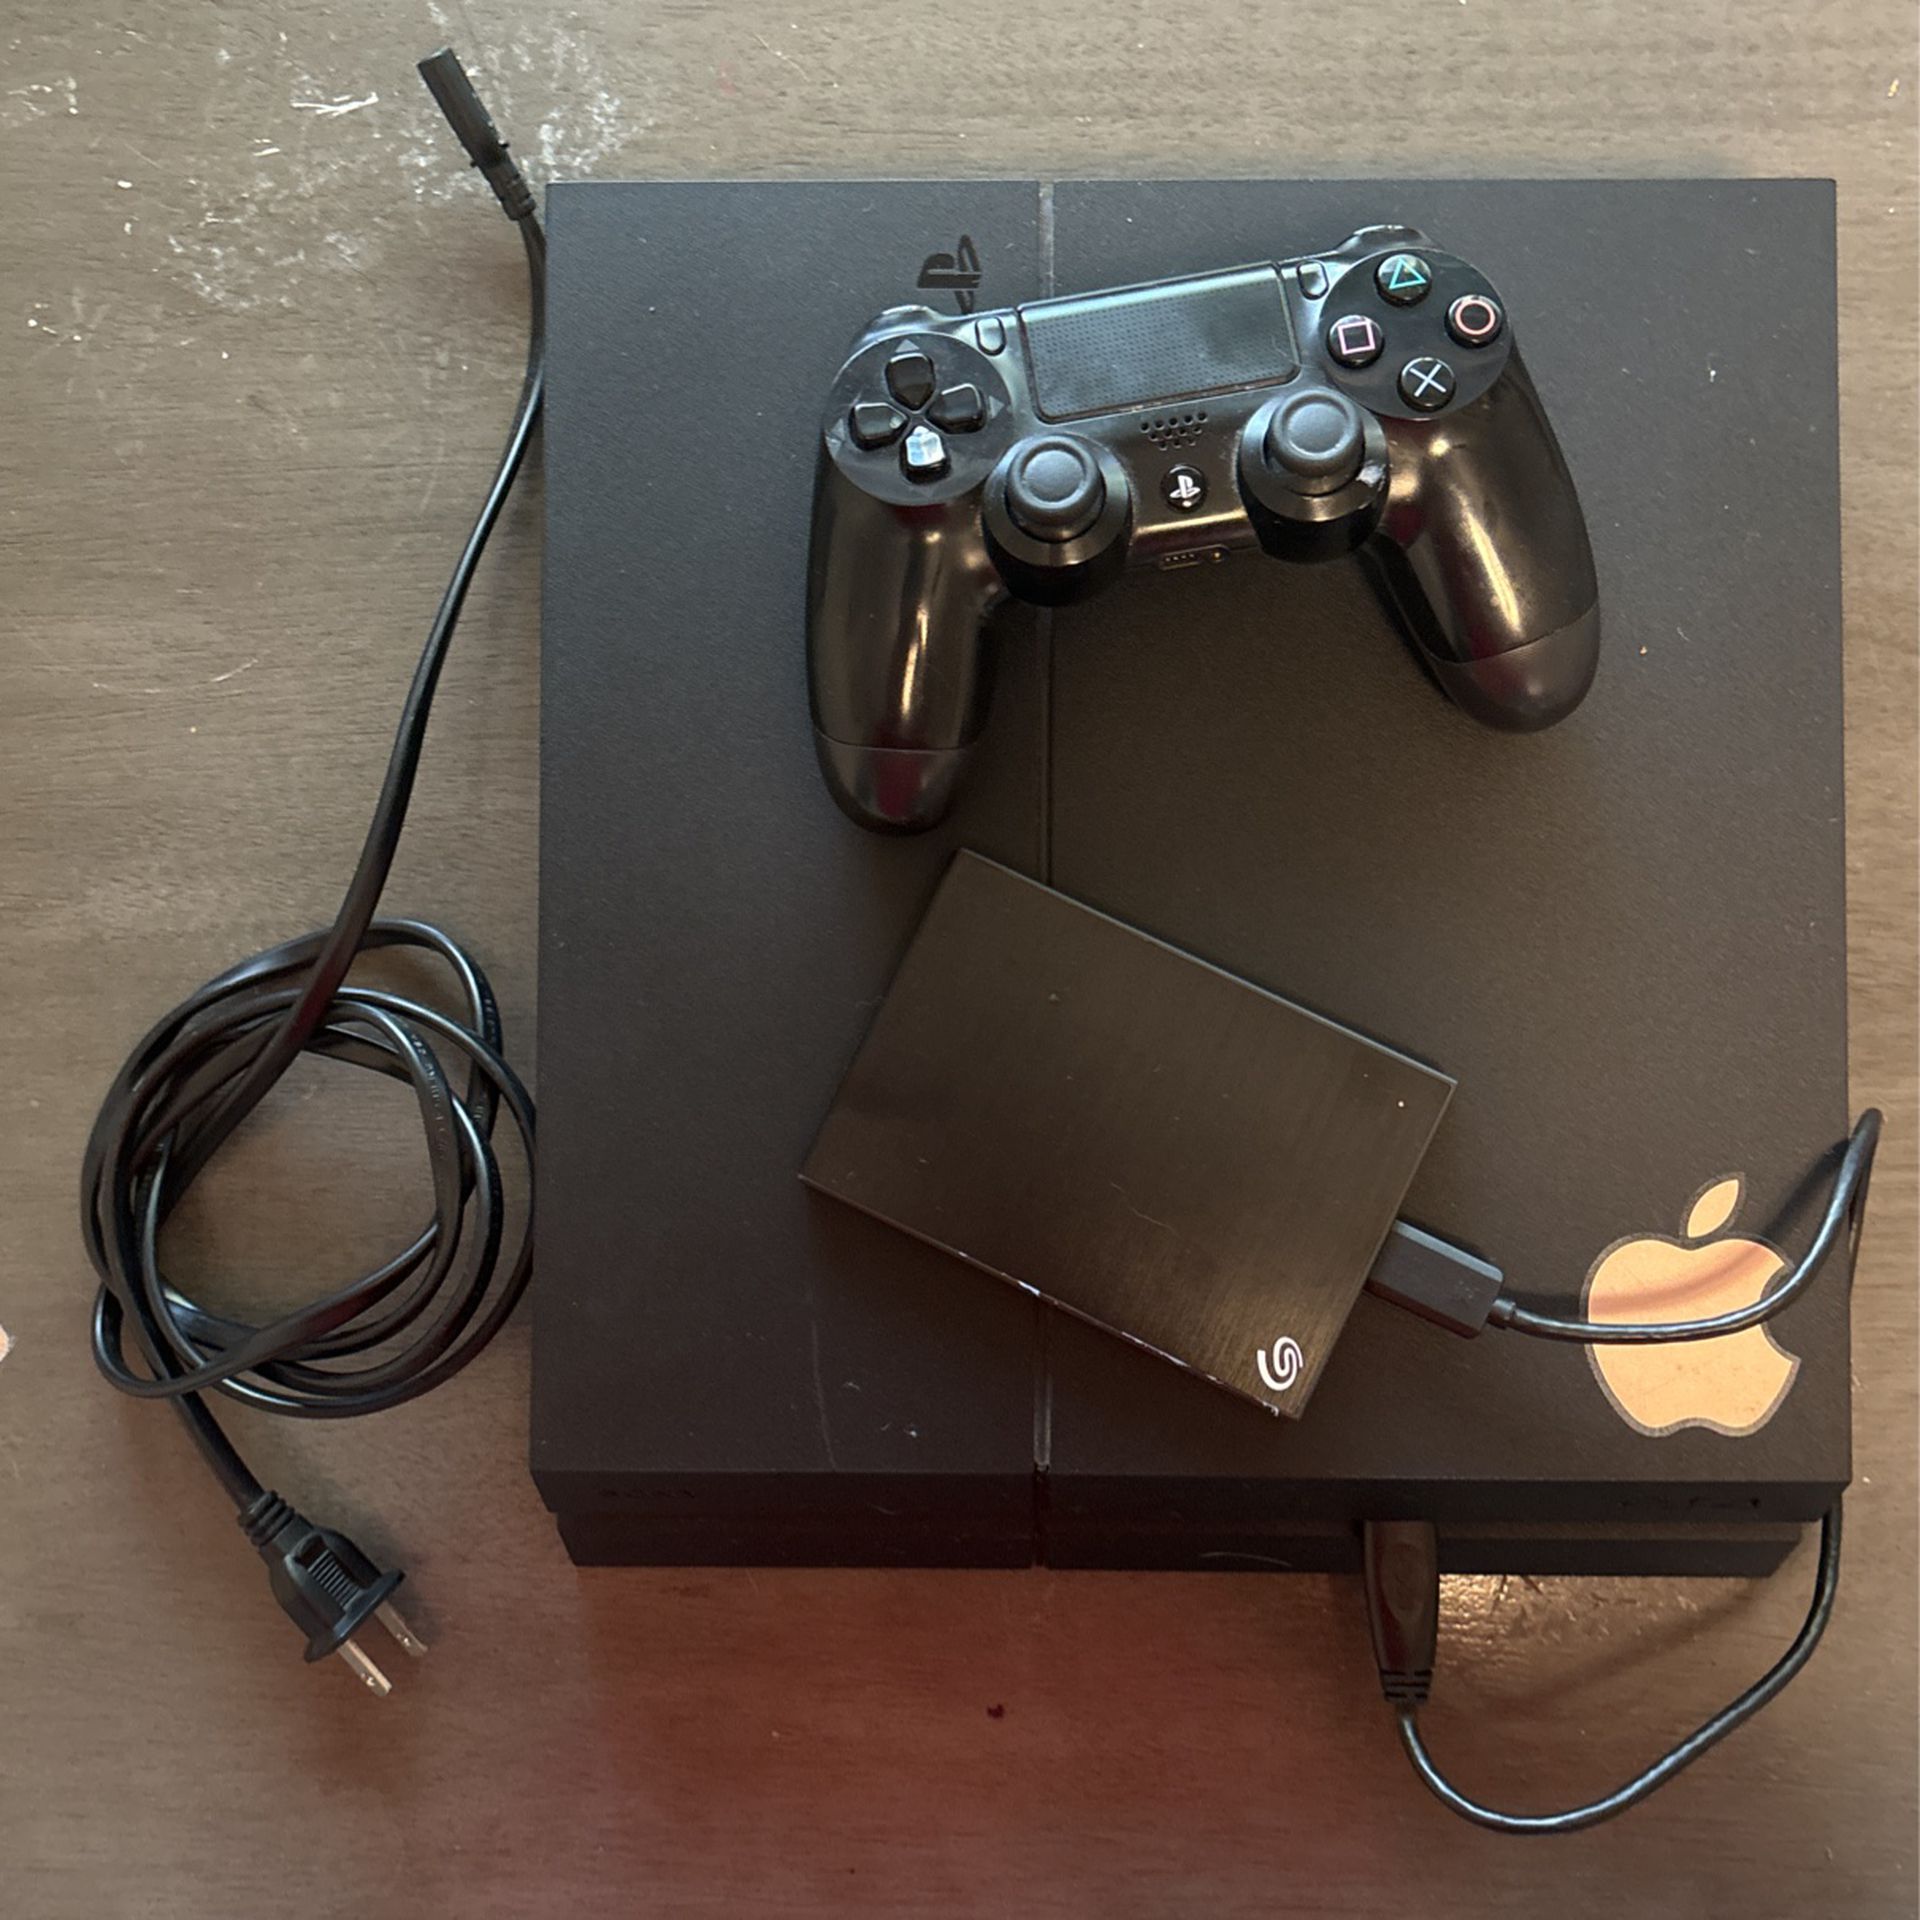 PS4 w/Controller, 1TB External Storage and Power Cord